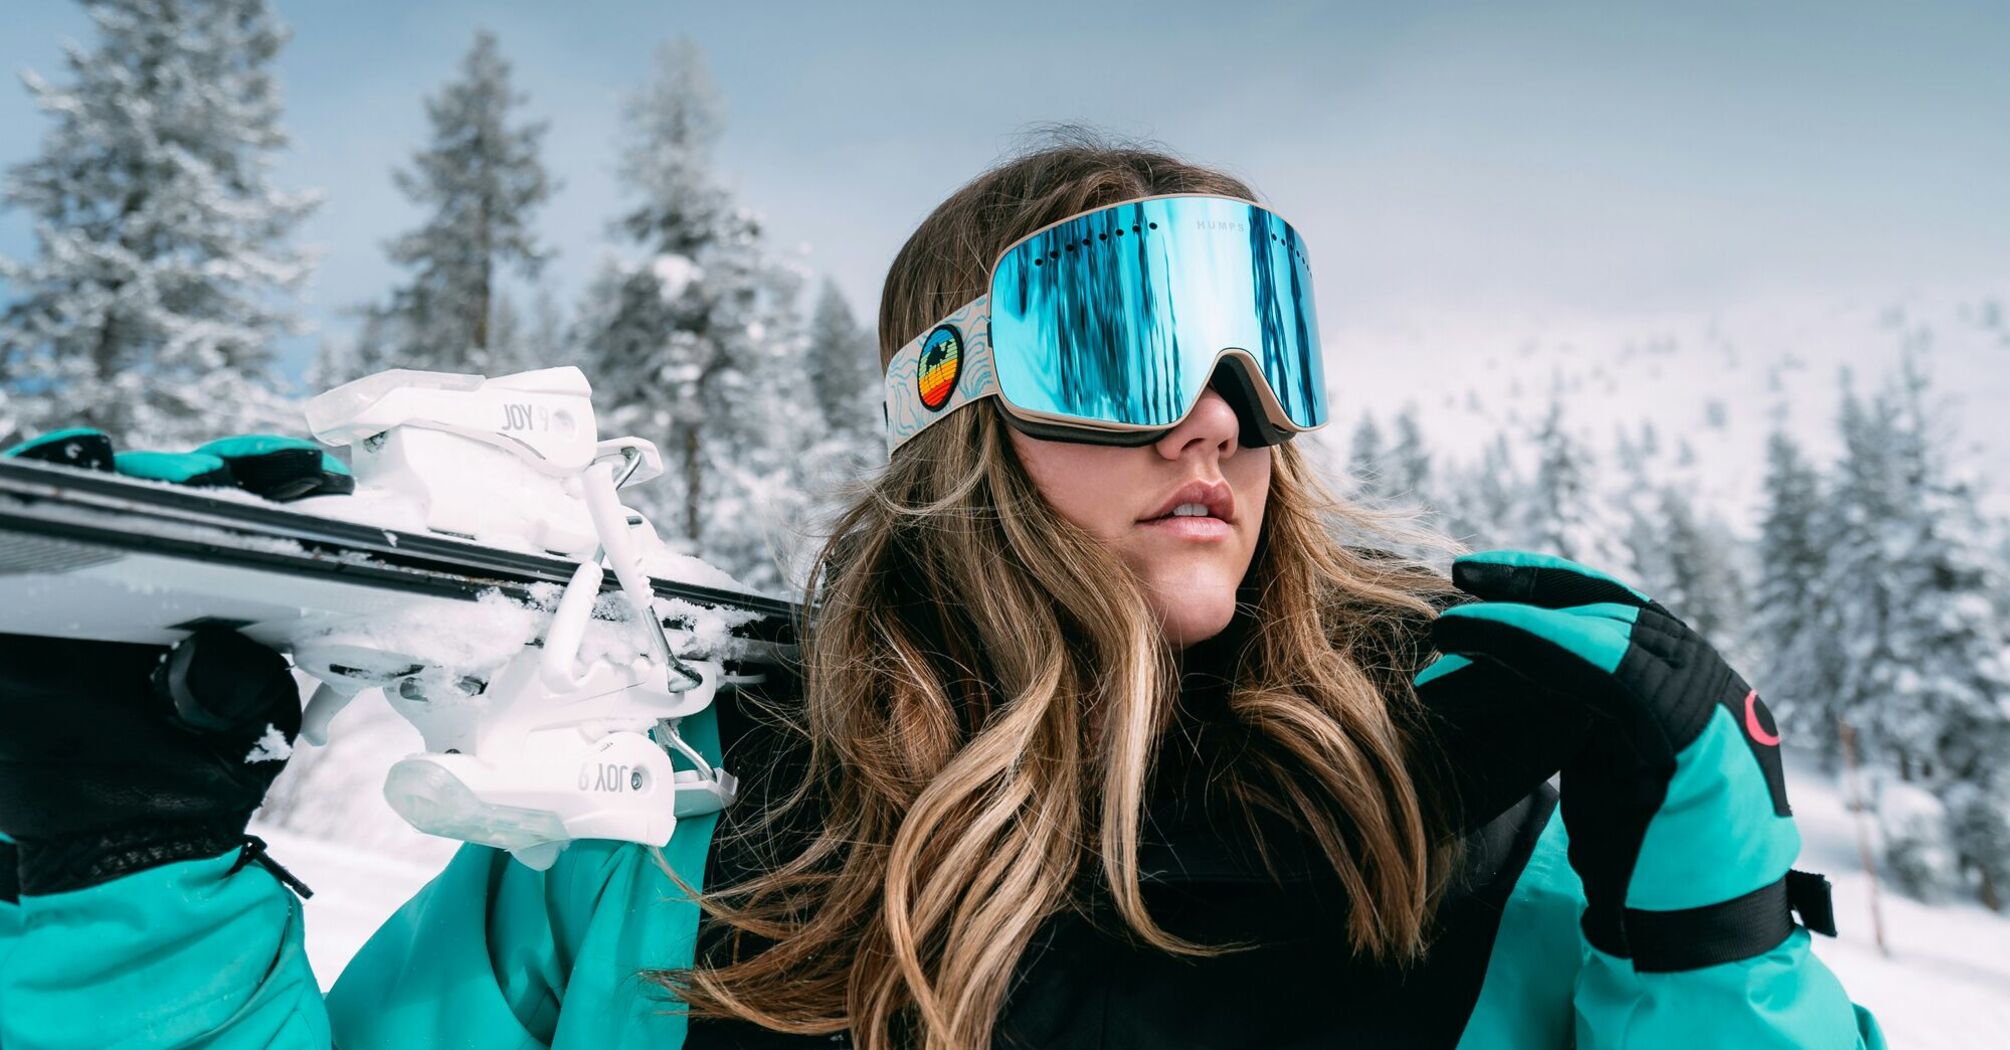 A woman in a teal jacket wearing large reflective ski goggles and carrying a pair of skis on her shoulder with snowy trees in the background